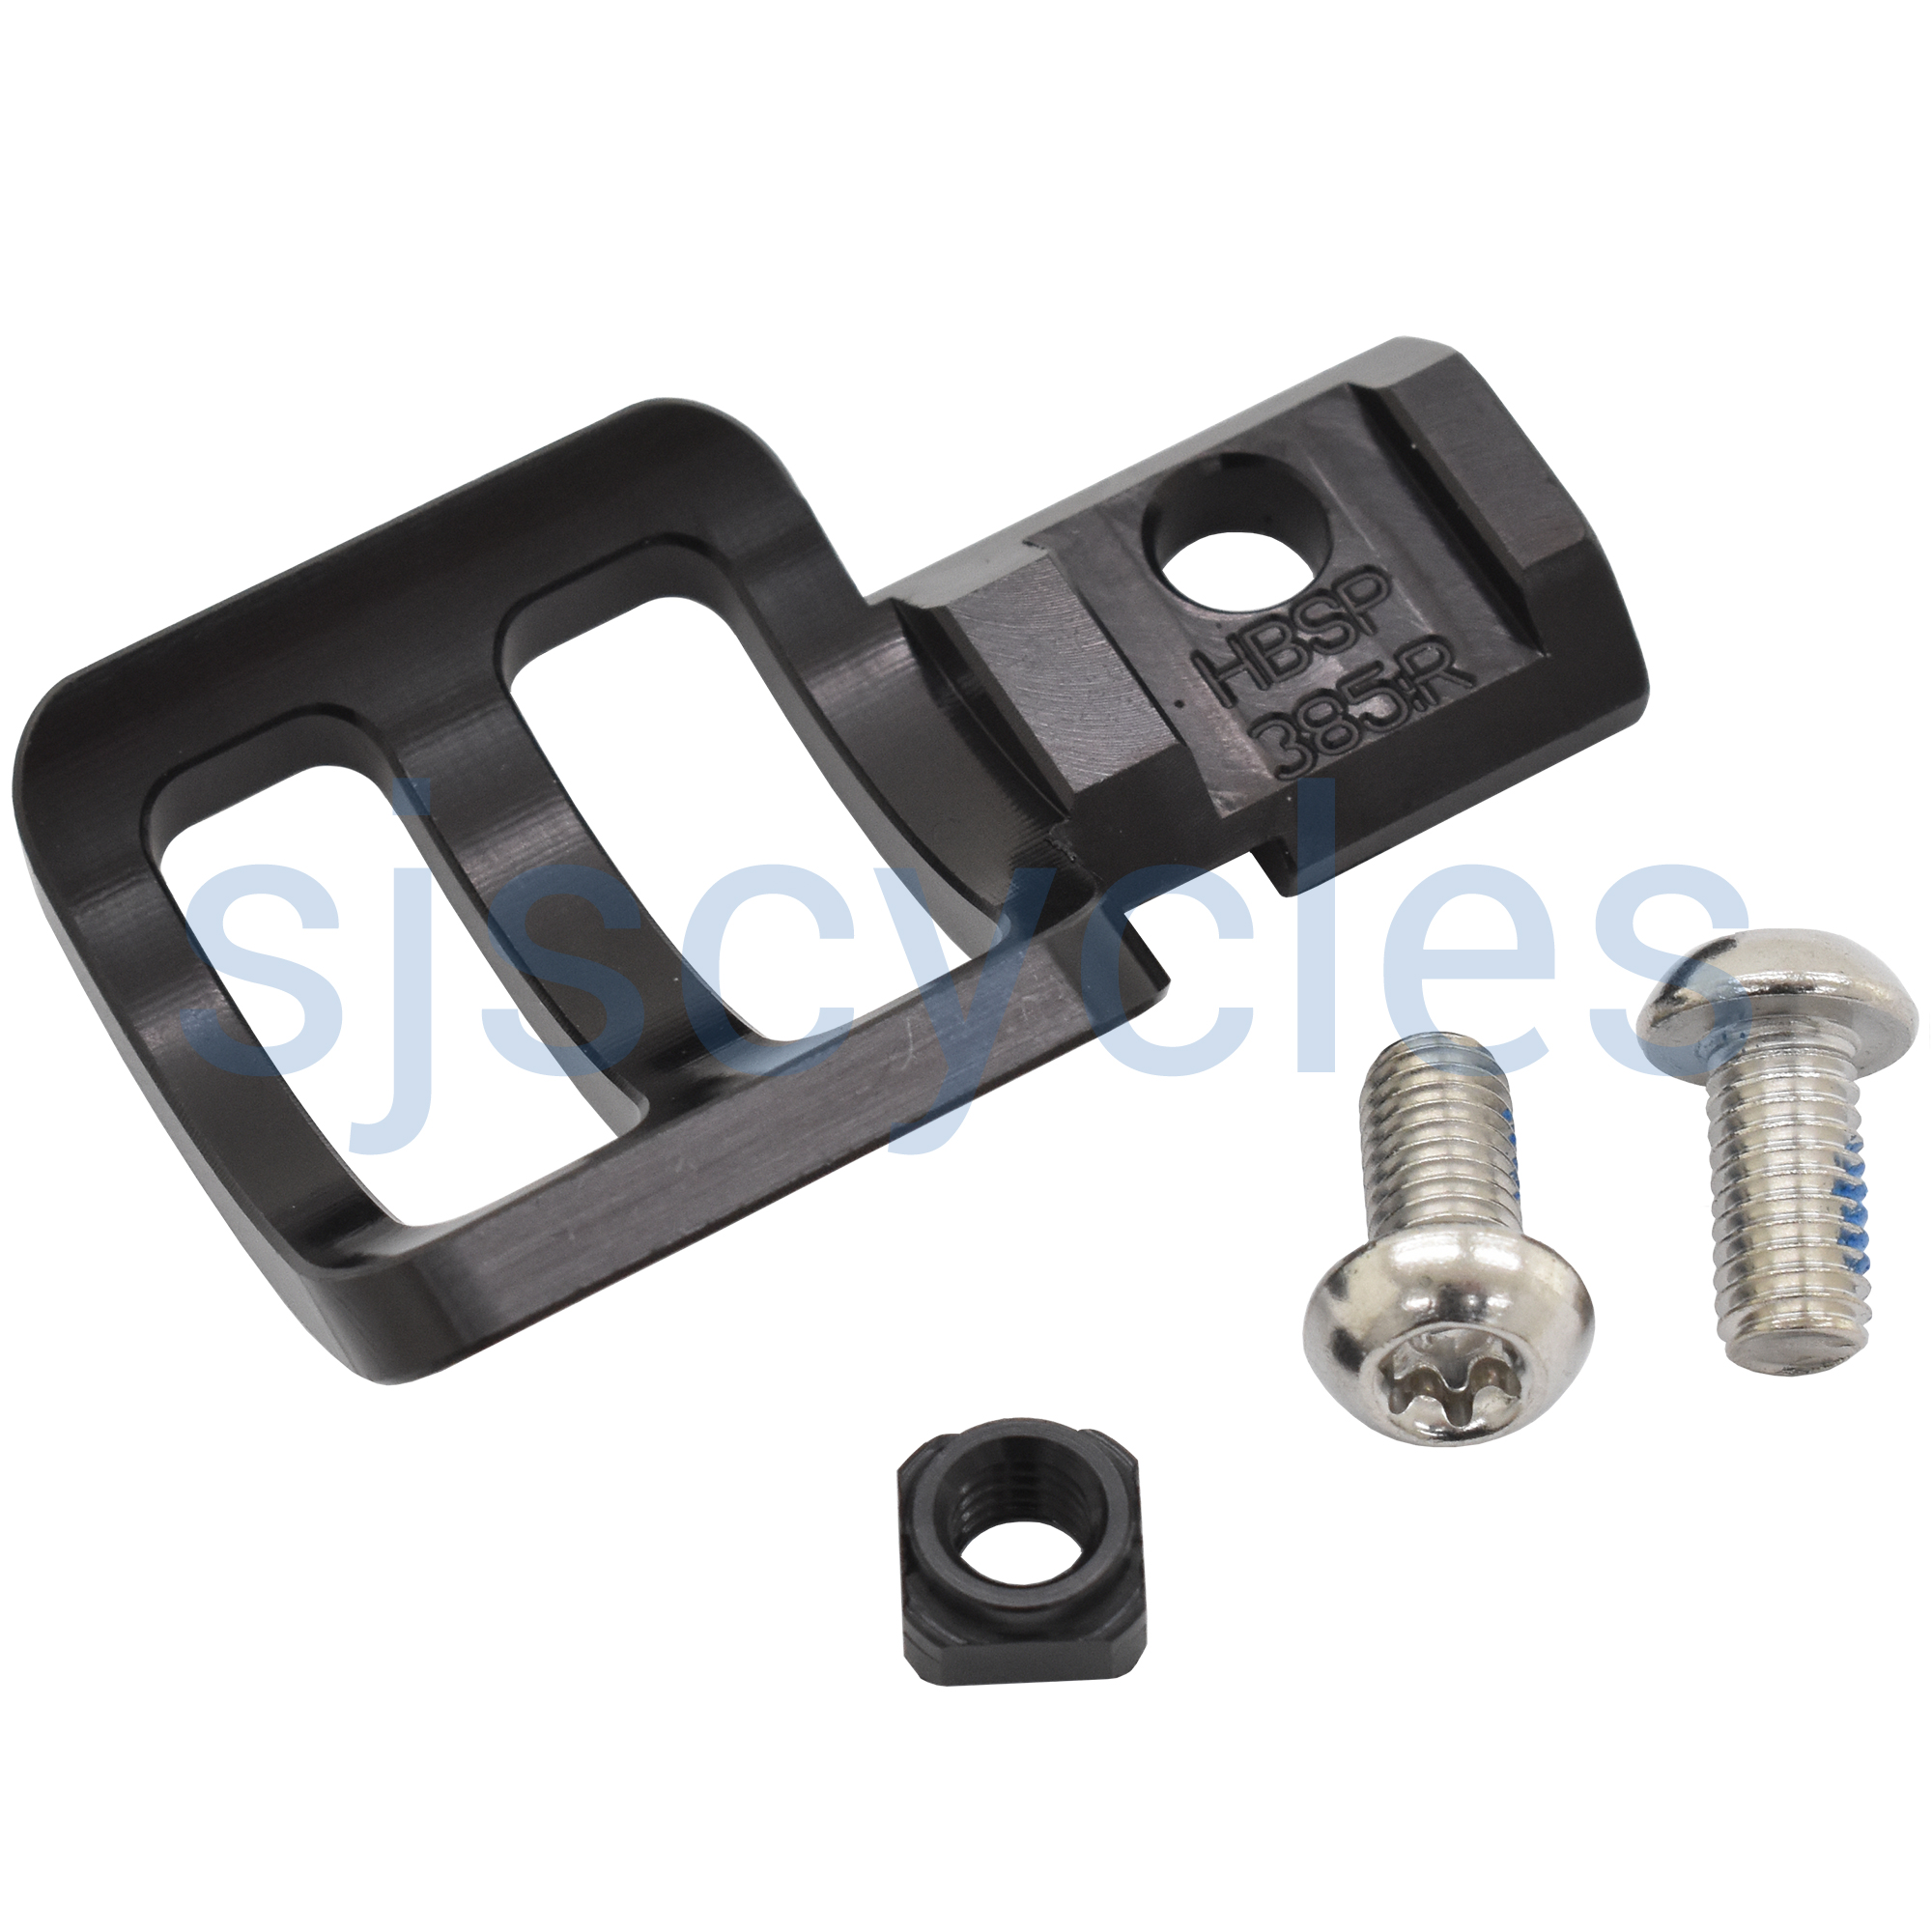 Hope Tech lever clamp for Shimano XTR shift lever Pair